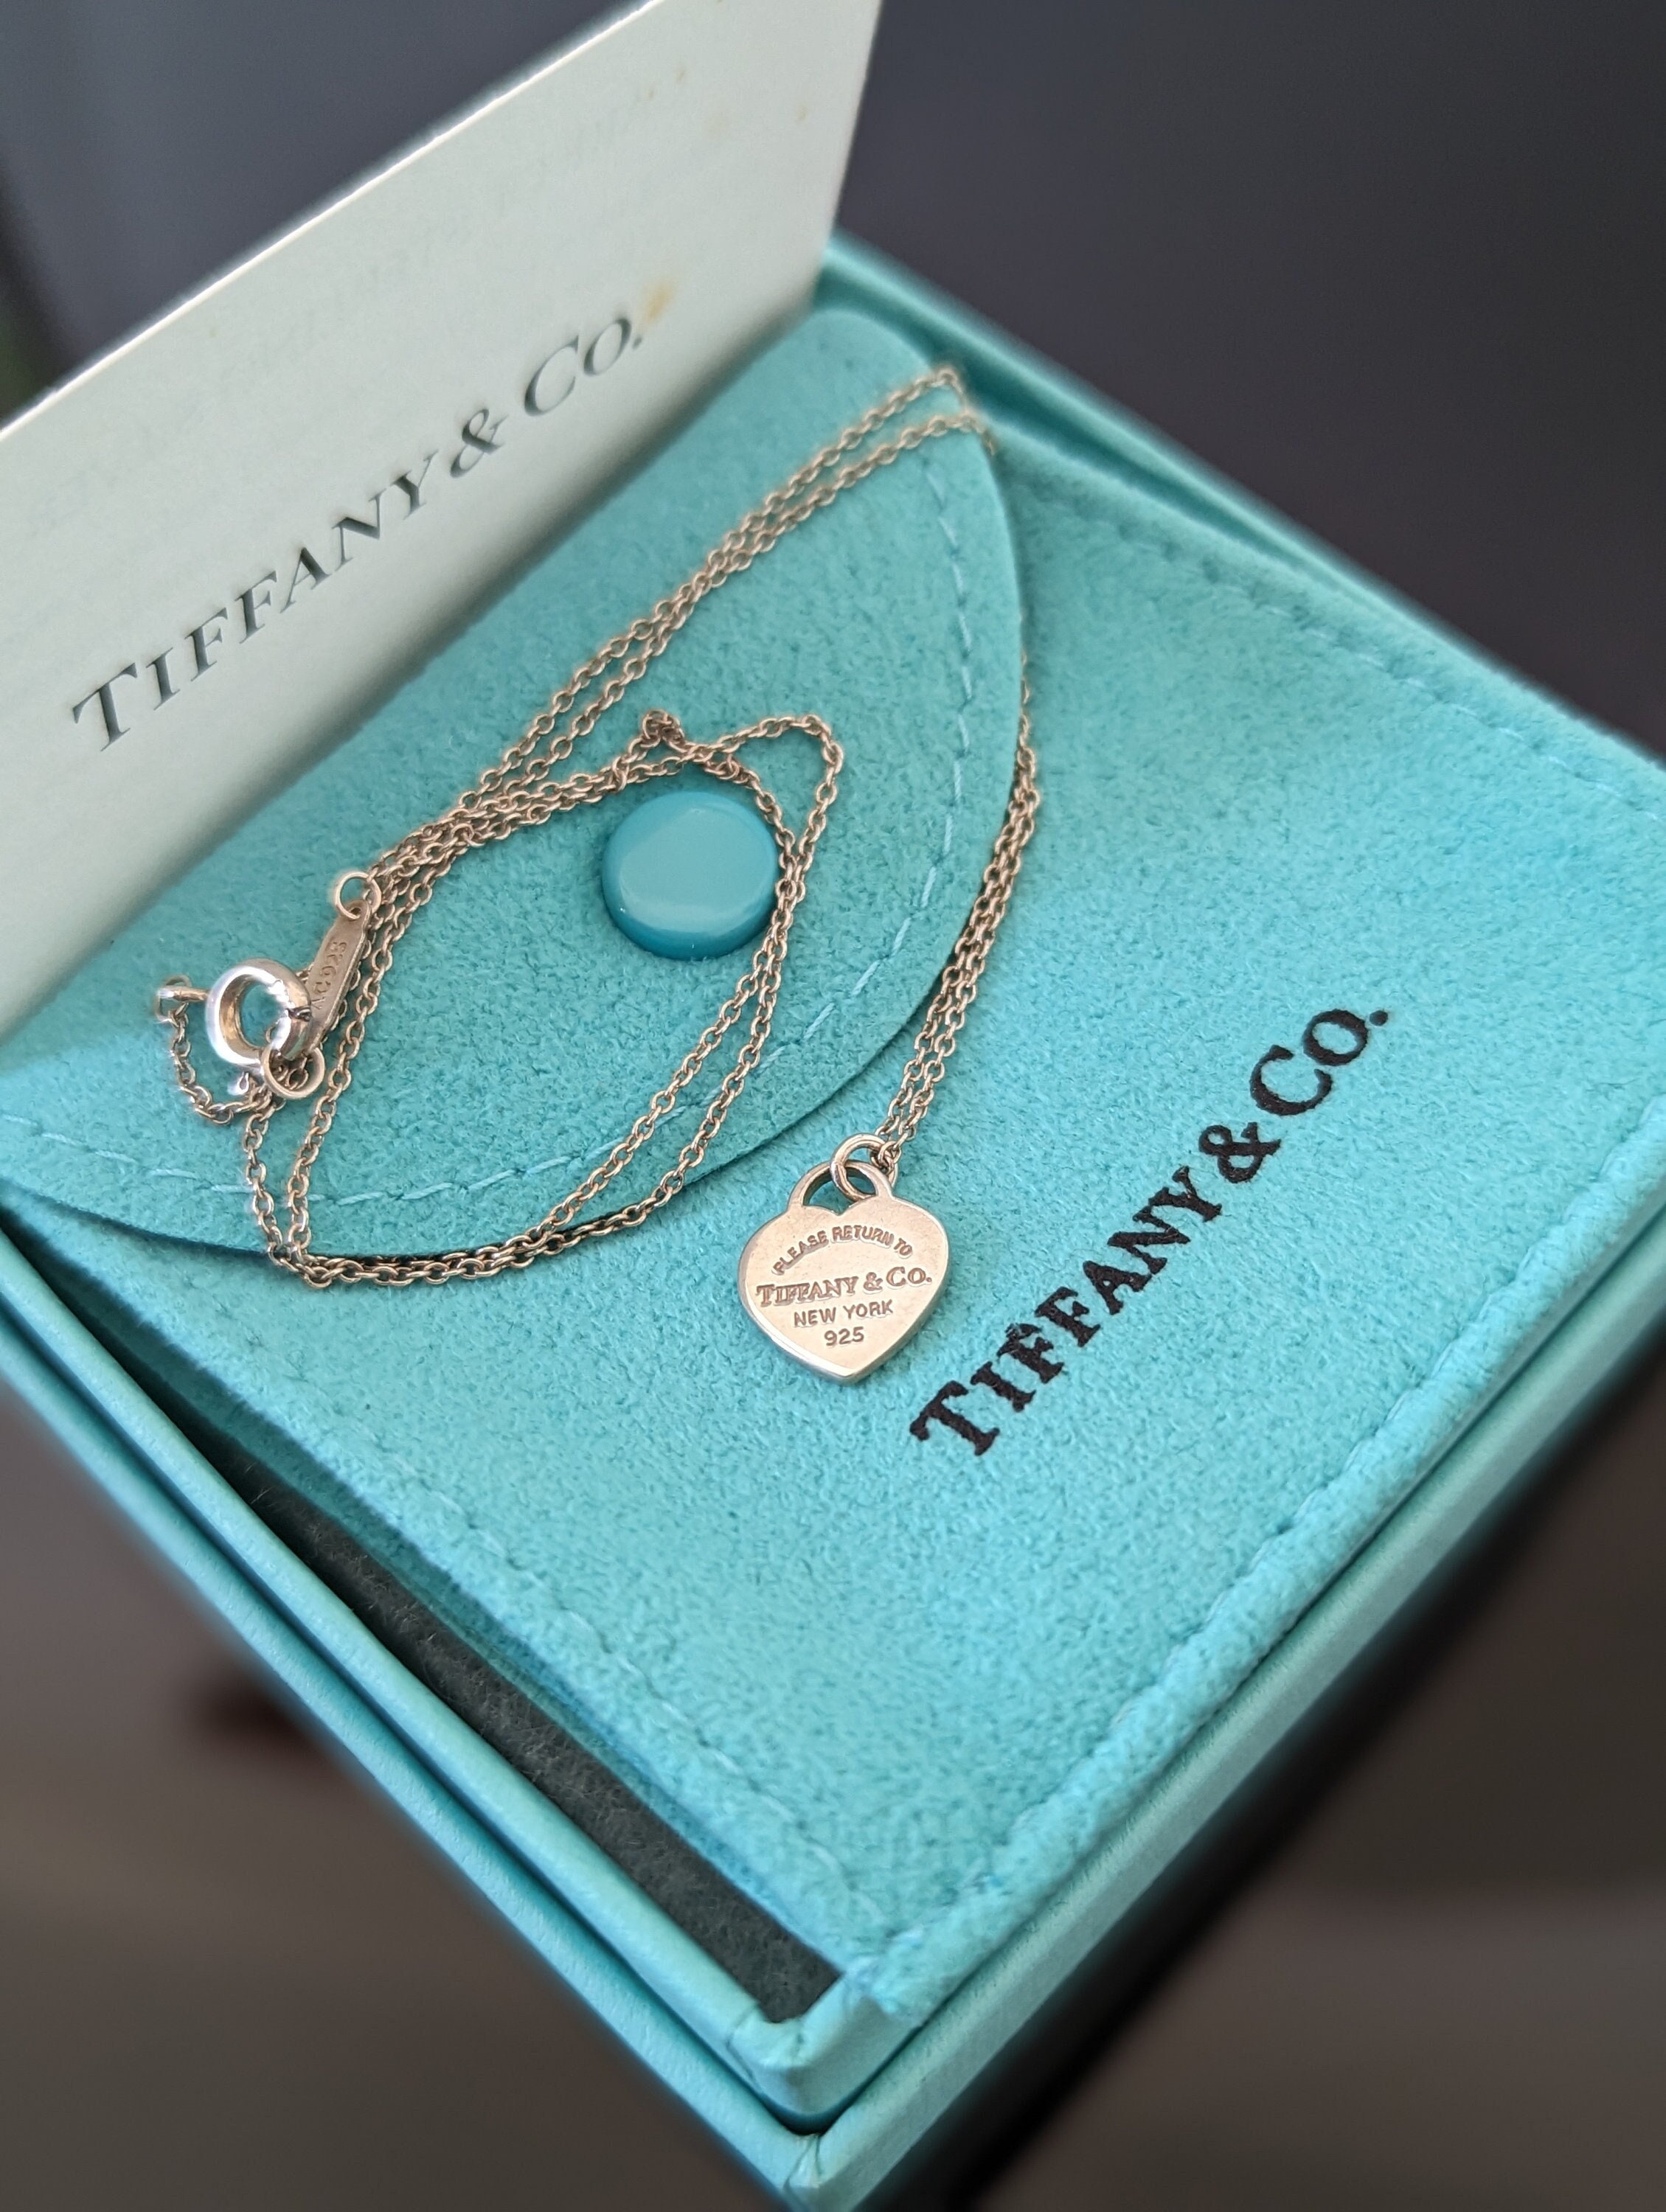 Tiffany & Co. .925 Sterling Silver Engravable Blank Heart Tag Necklace 16